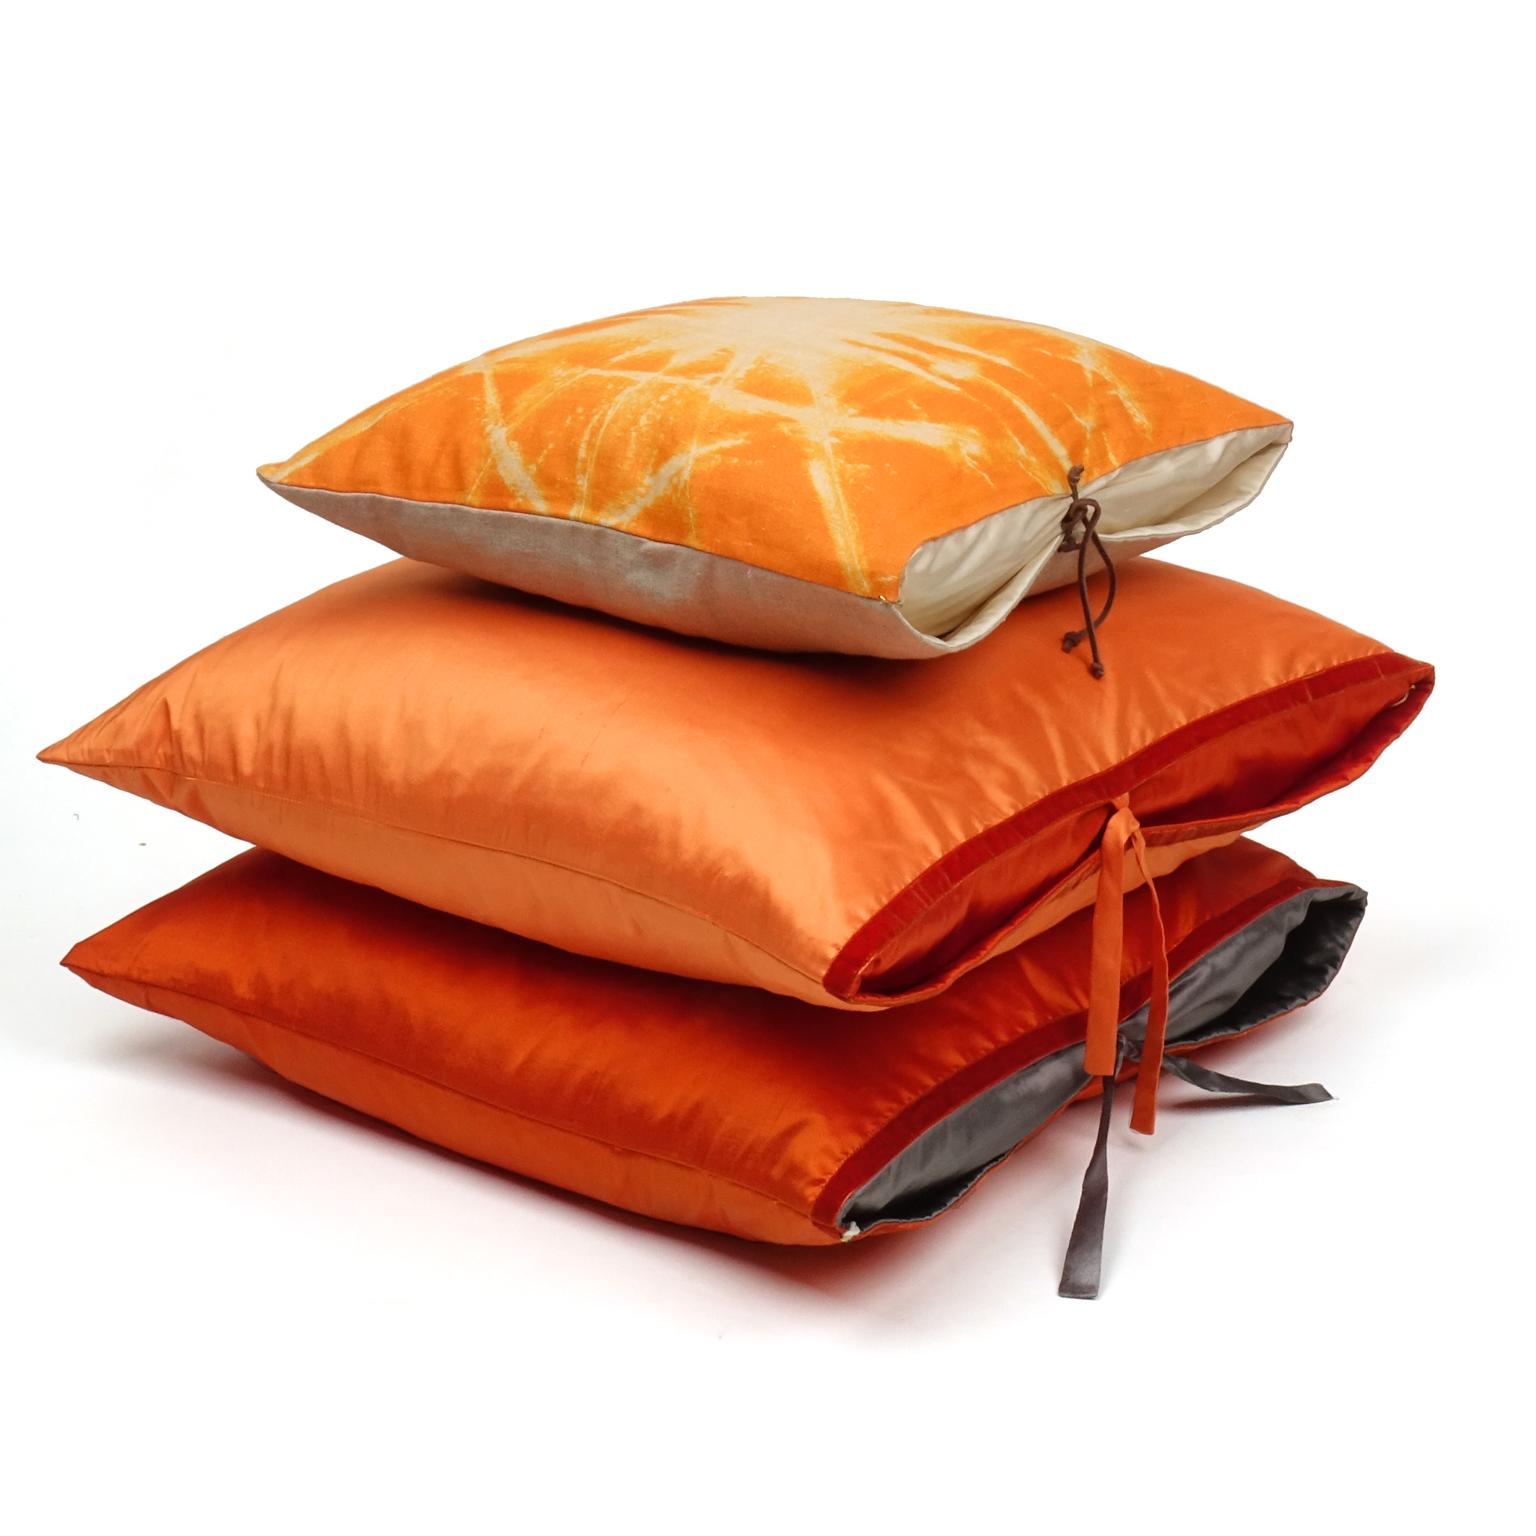 Printed Linen Throw Pillow Starburst Orange In New Condition For Sale In Brooklyn, NY